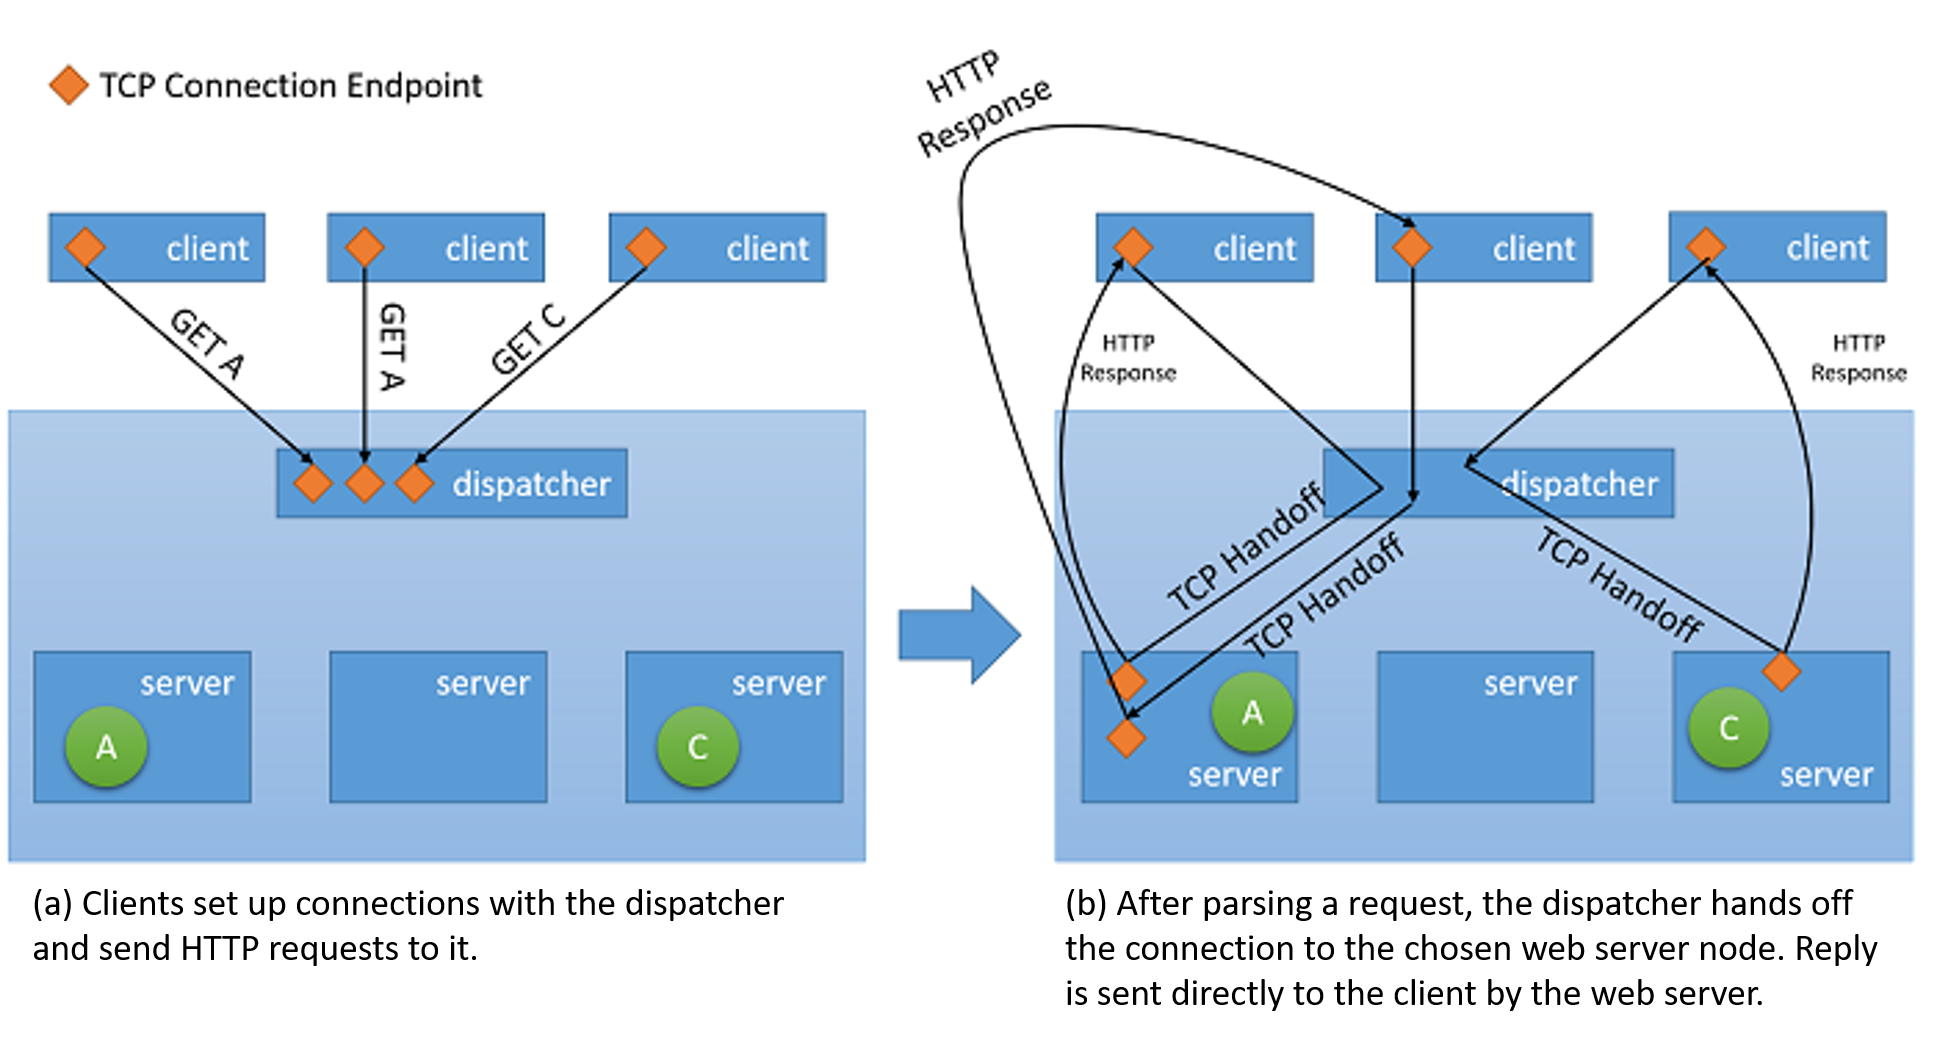 TCP handoff mechanism from dispatcher to the back-end server.